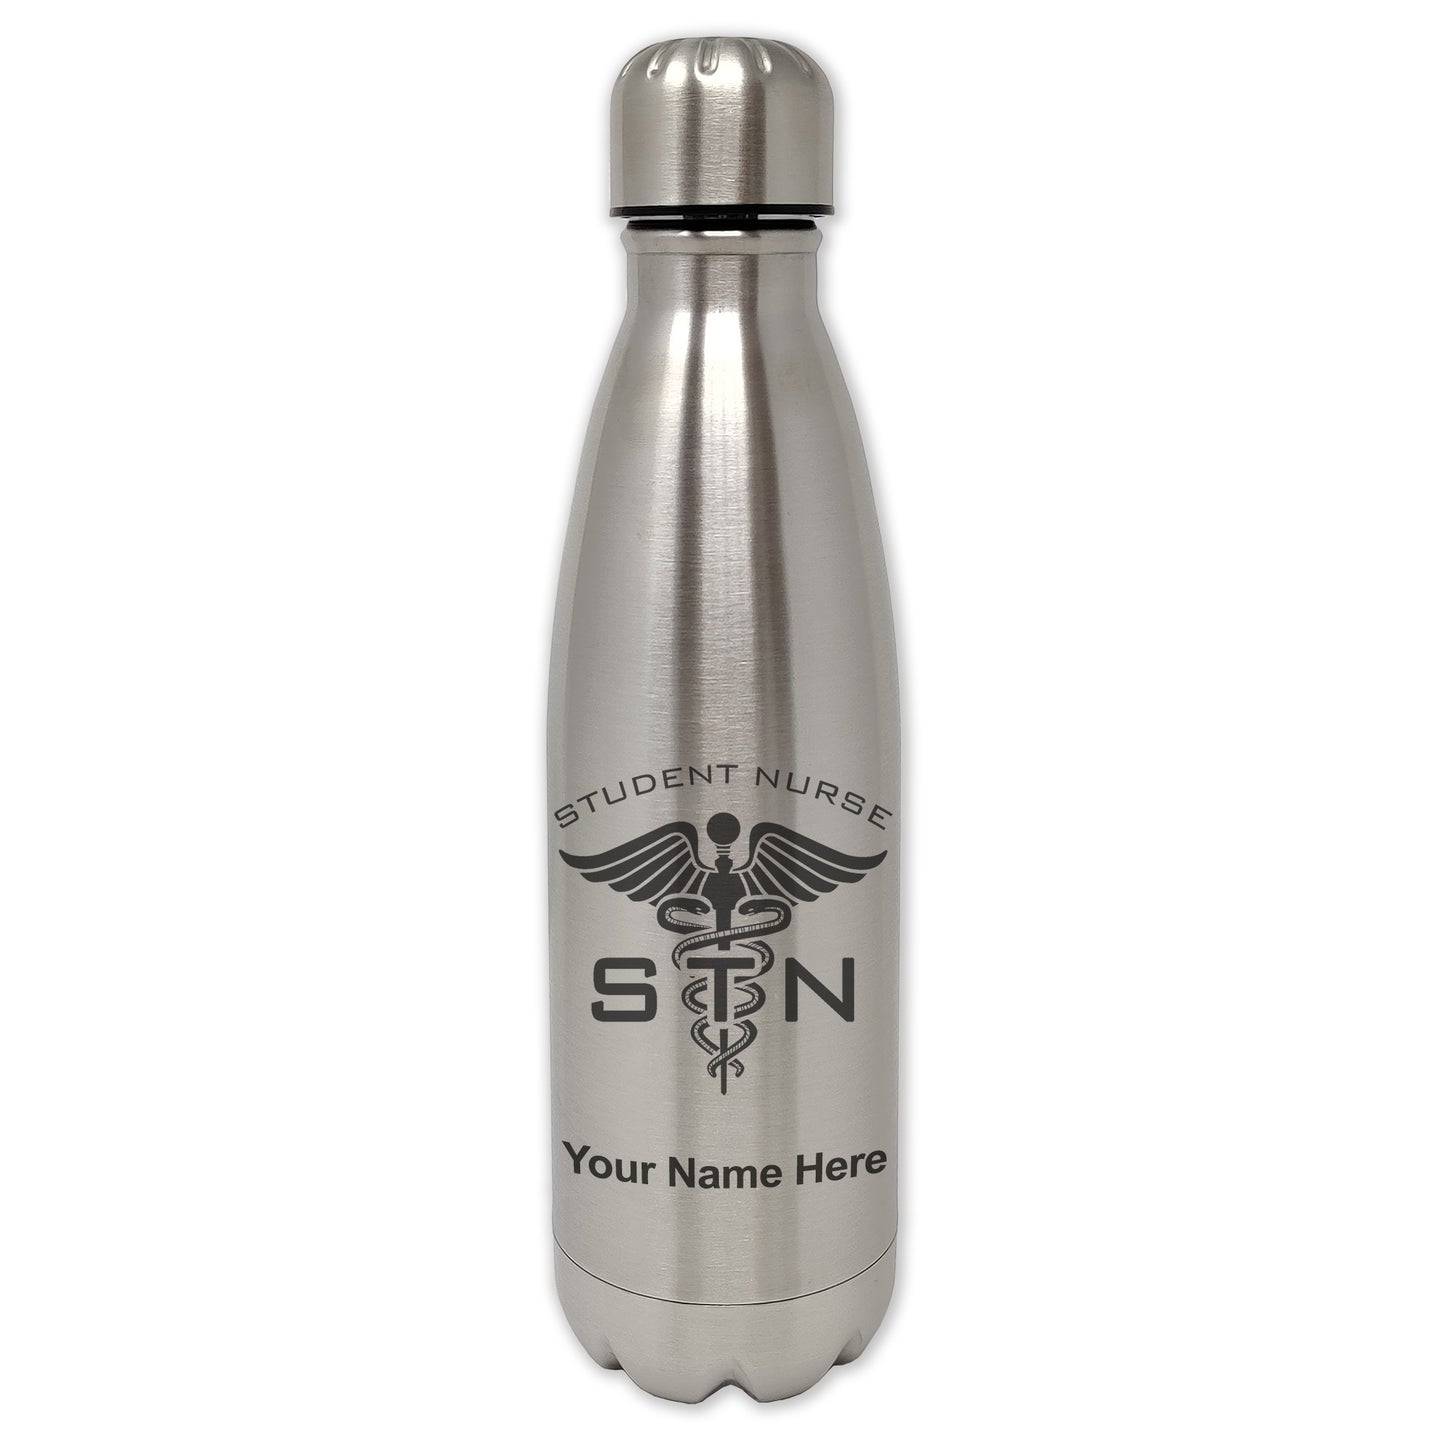 LaserGram Single Wall Water Bottle, STN Student Nurse, Personalized Engraving Included